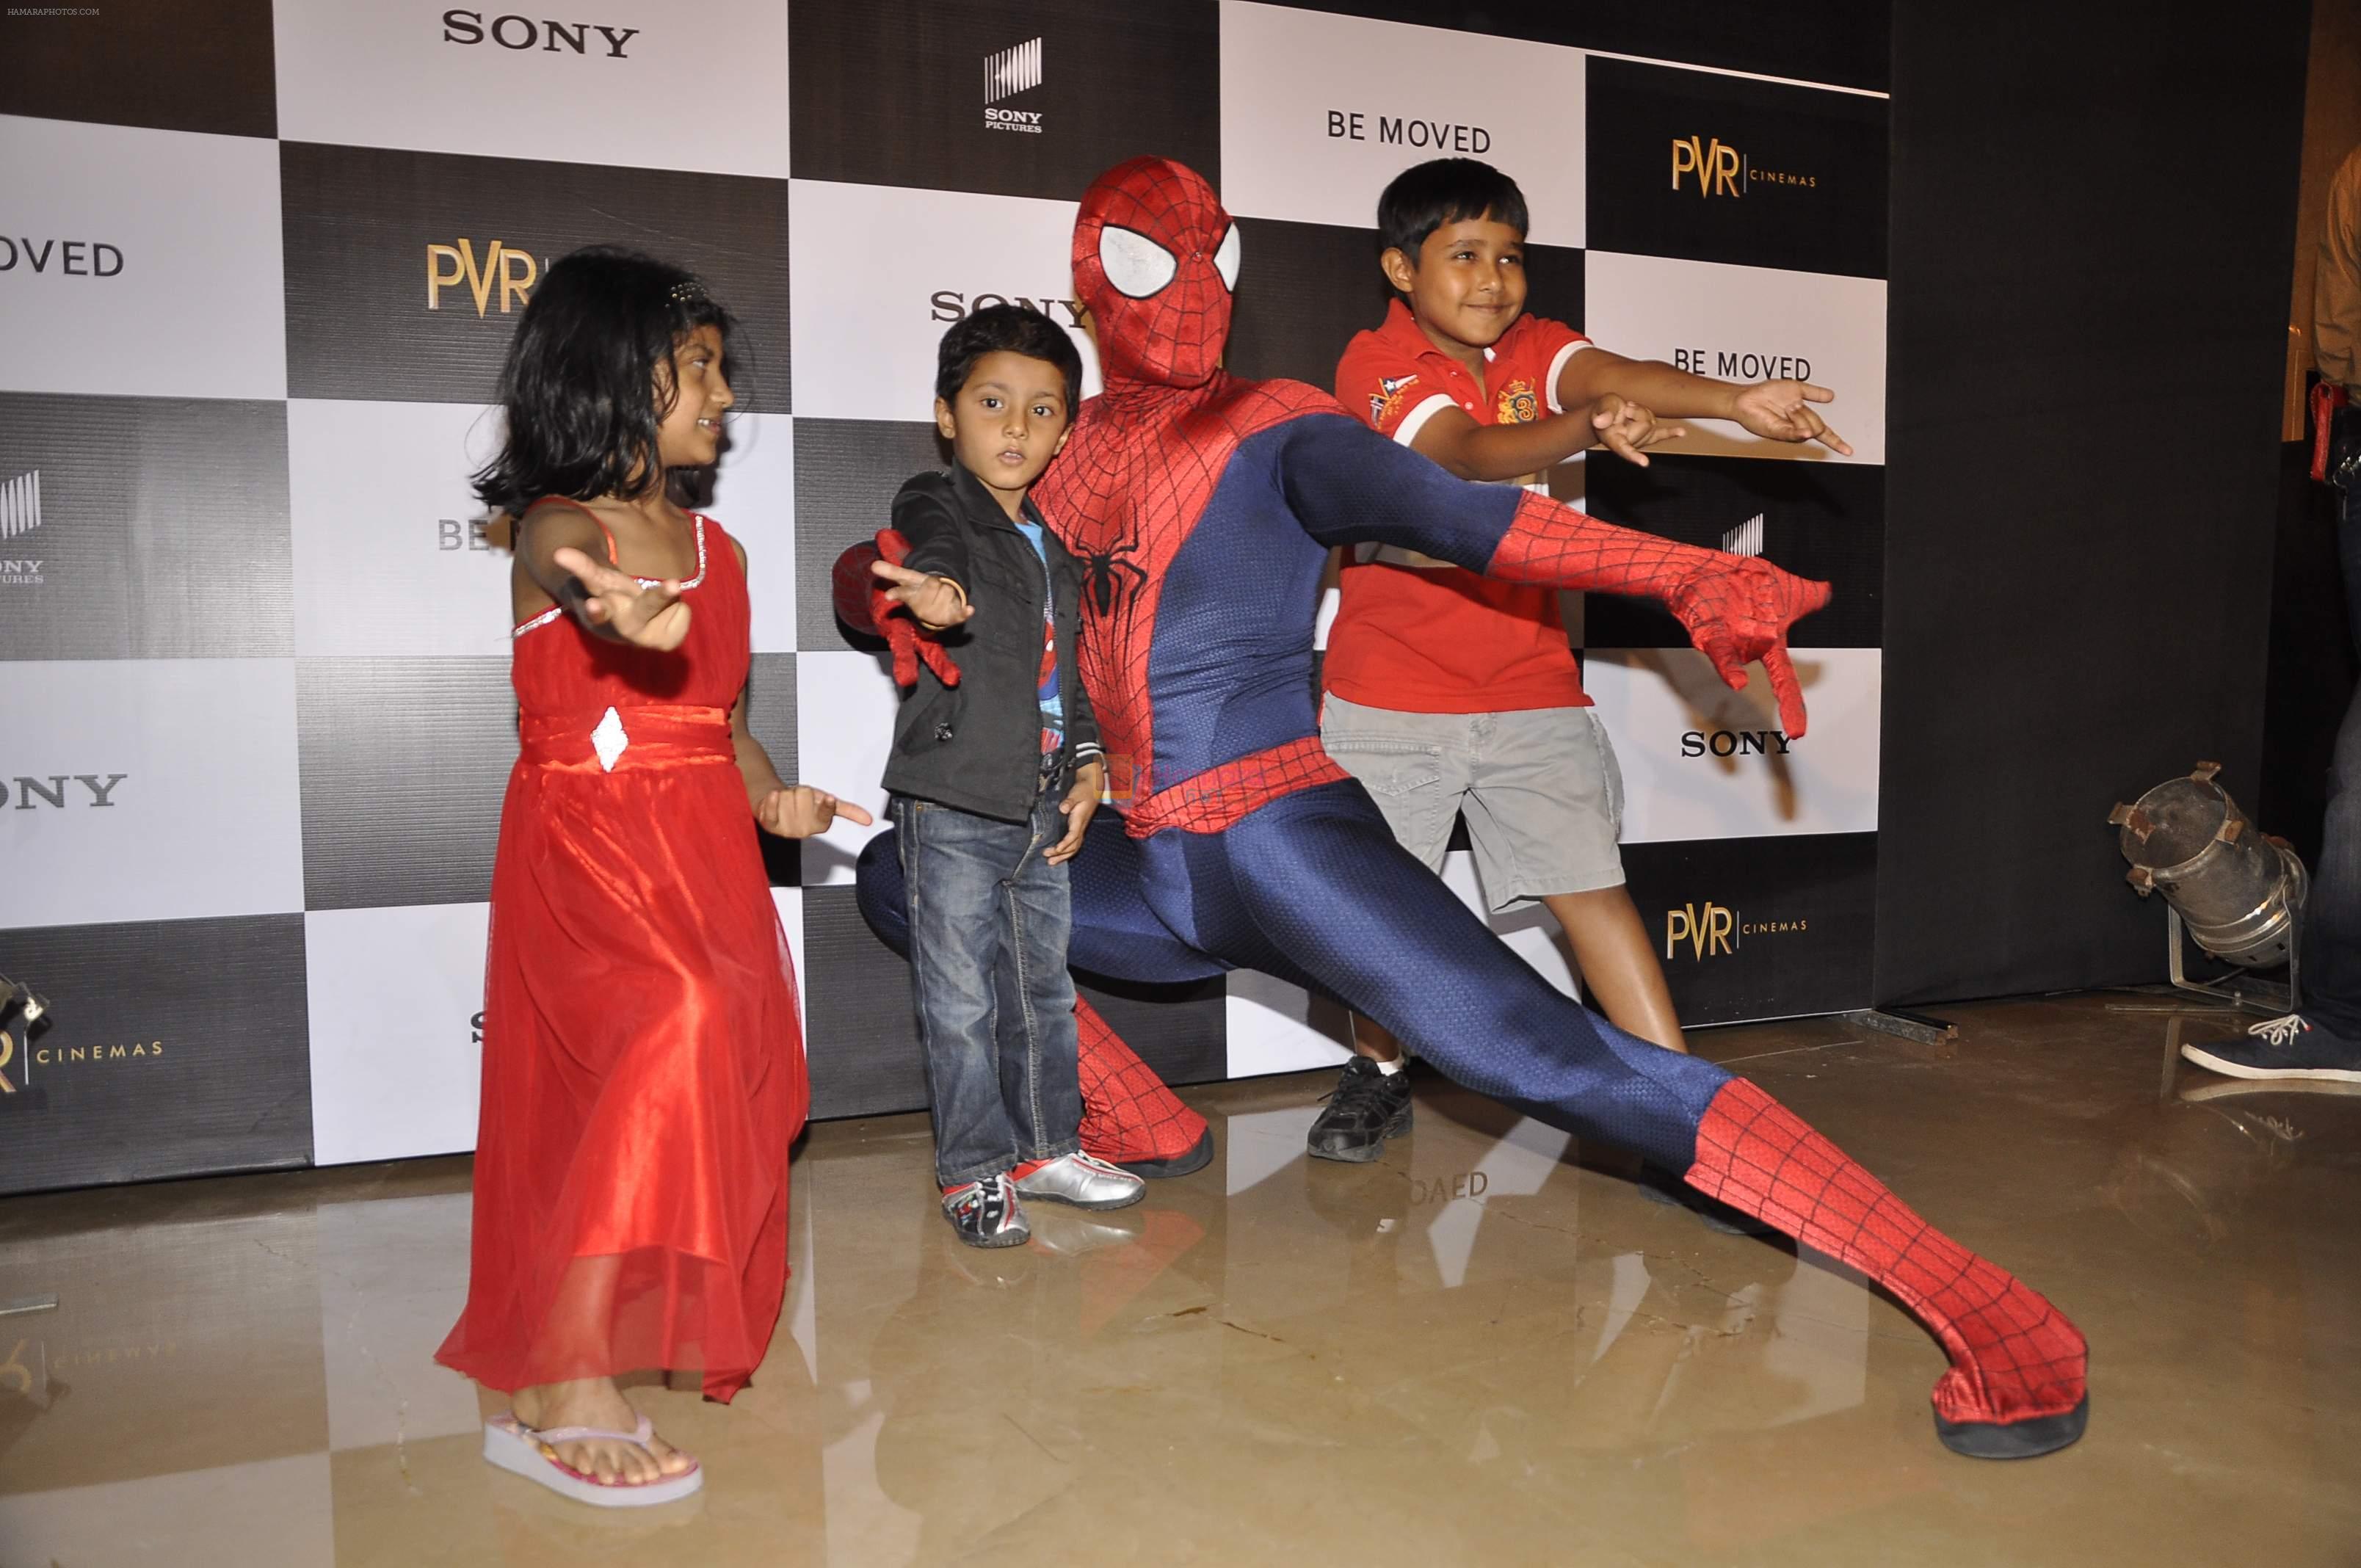 at the Grand Premiere of the Amazing SPIDERMAN 2 in Mumbai on 29th April 2014